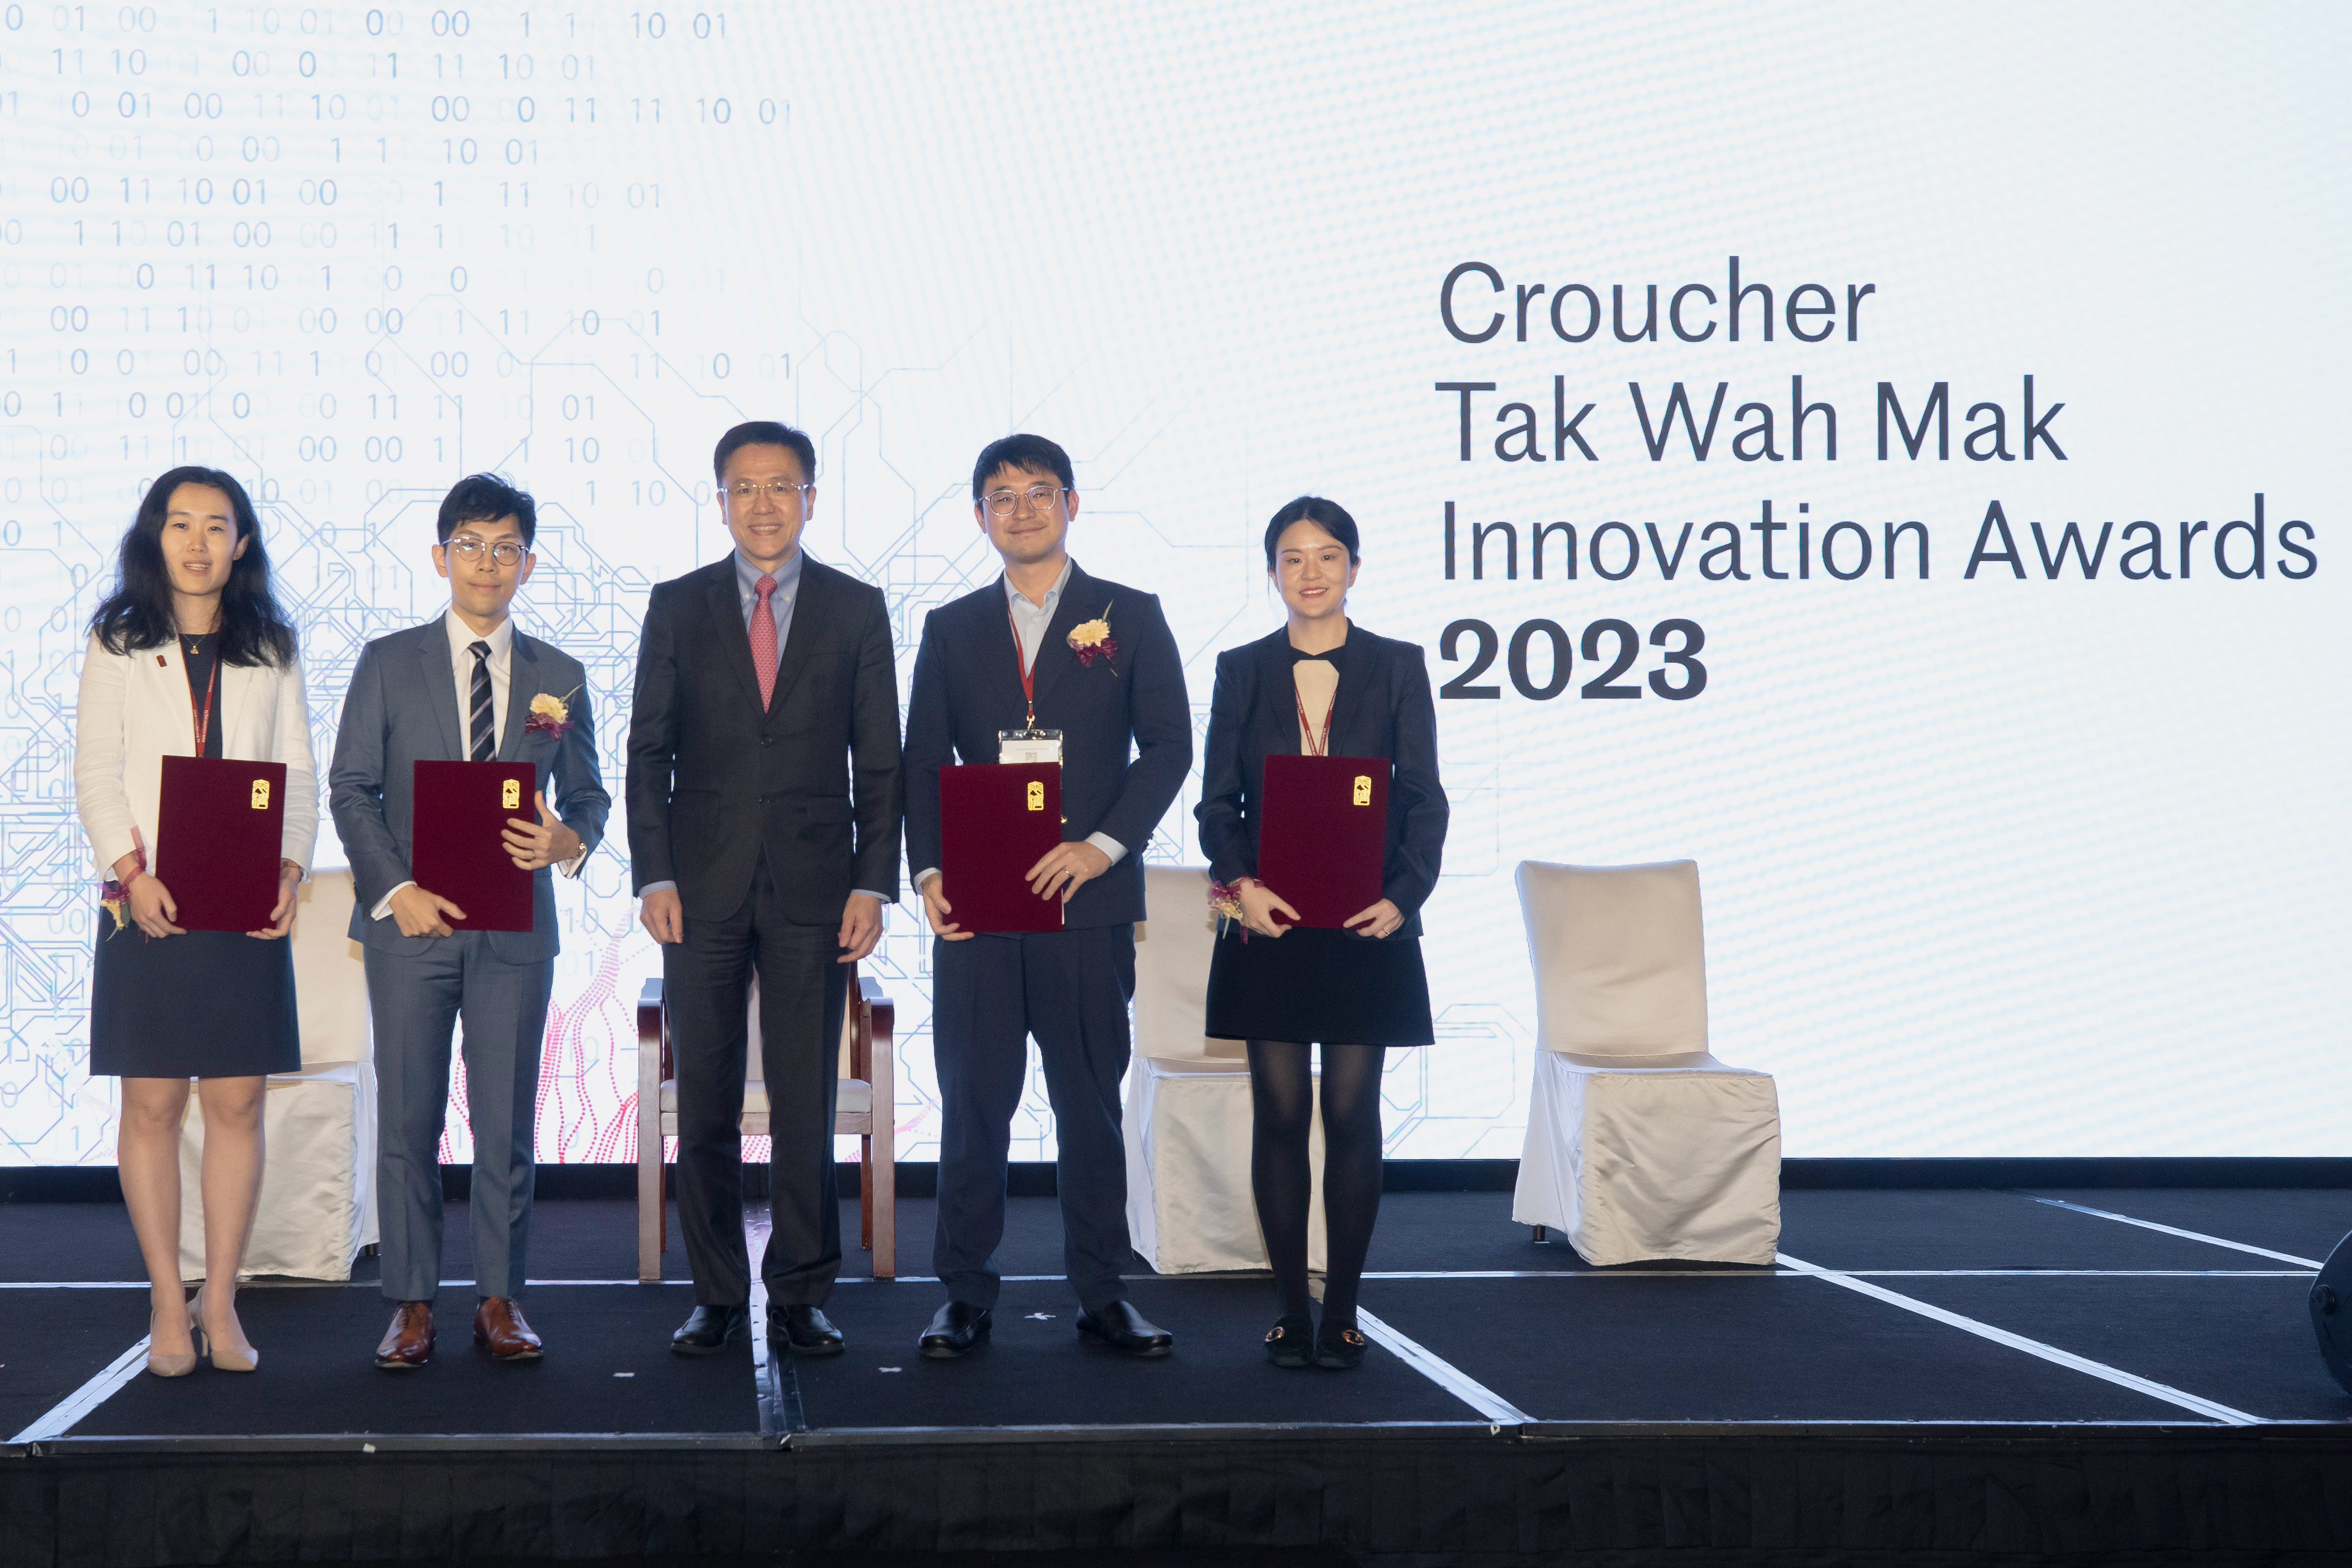 Croucher Foundation held the Foundation Day Dinner and Awards Presentation Ceremony on 18 December to present the Croucher Tak Wah Mak Innovation Awards. Prof. SUN Dong (the centre), the Secretary for Innovation, Technology and Industry of the Hong Kong Special Administrative Region was the Guest of Honor at the ceremony.